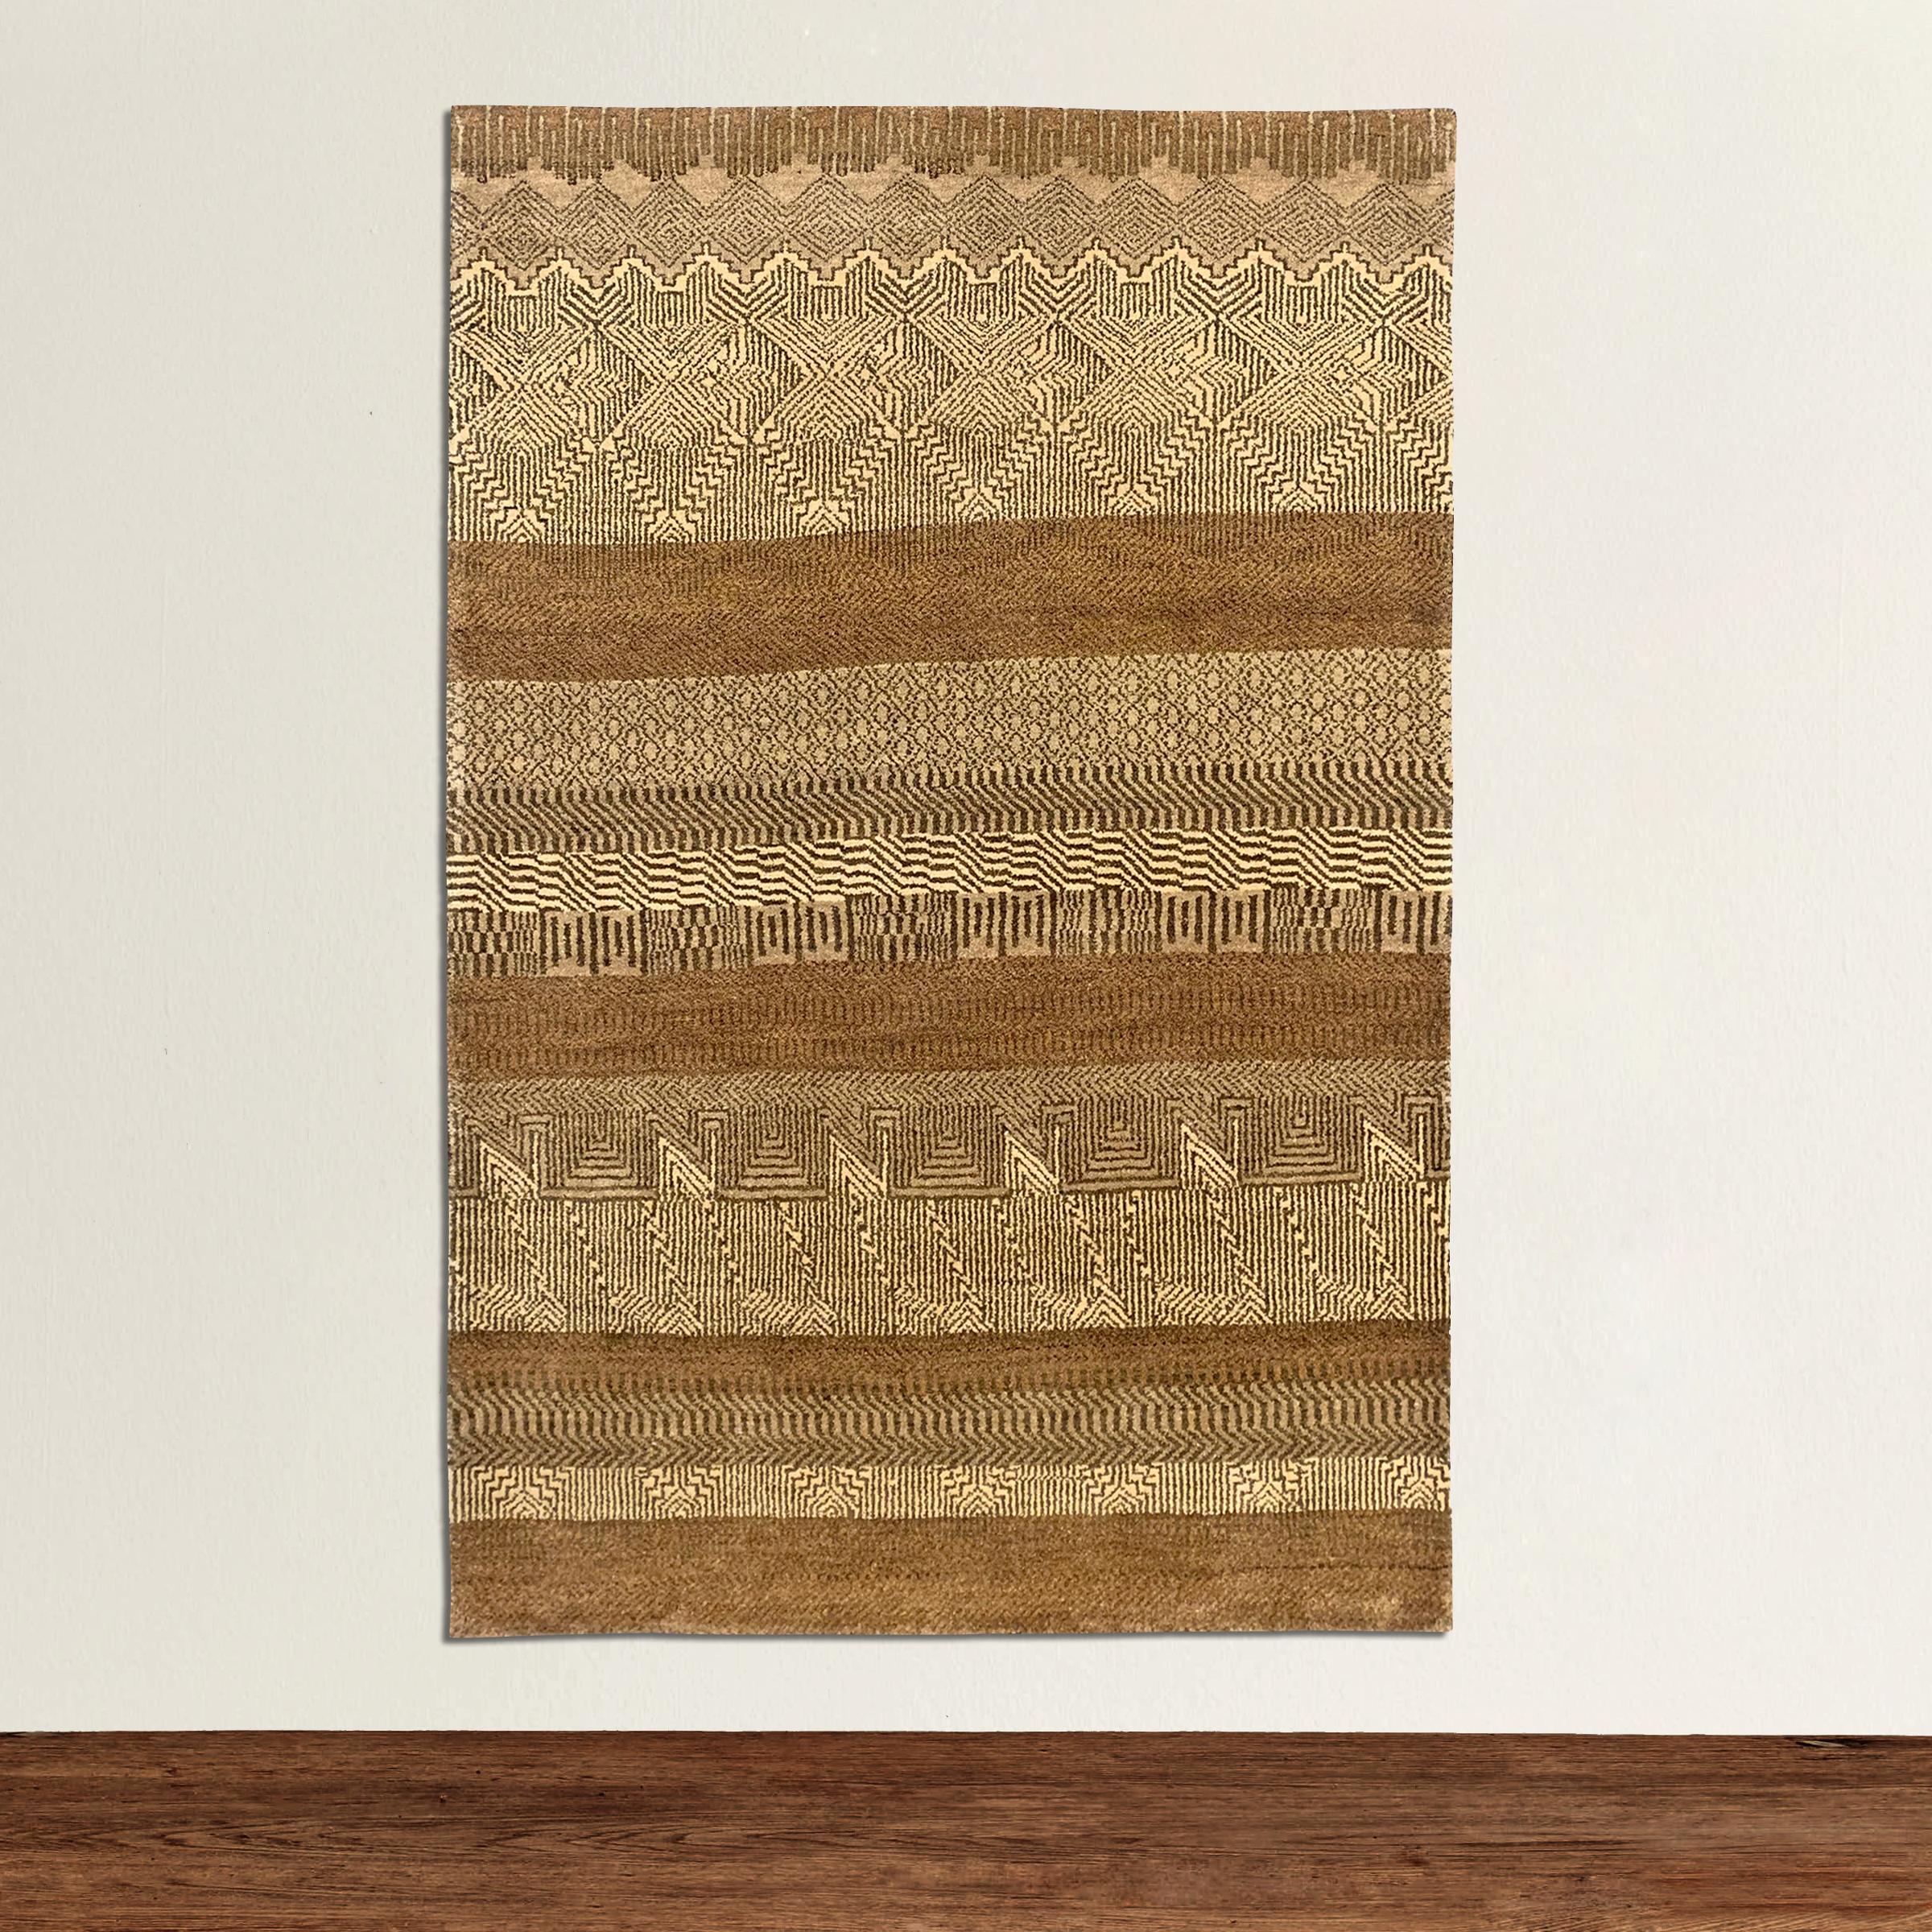 A wonderful contemporary Indian handwoven wool rug with a tribal pattern containing myriad geometric patterns and stripes woven in varying shades of brown, cream, and taupe.